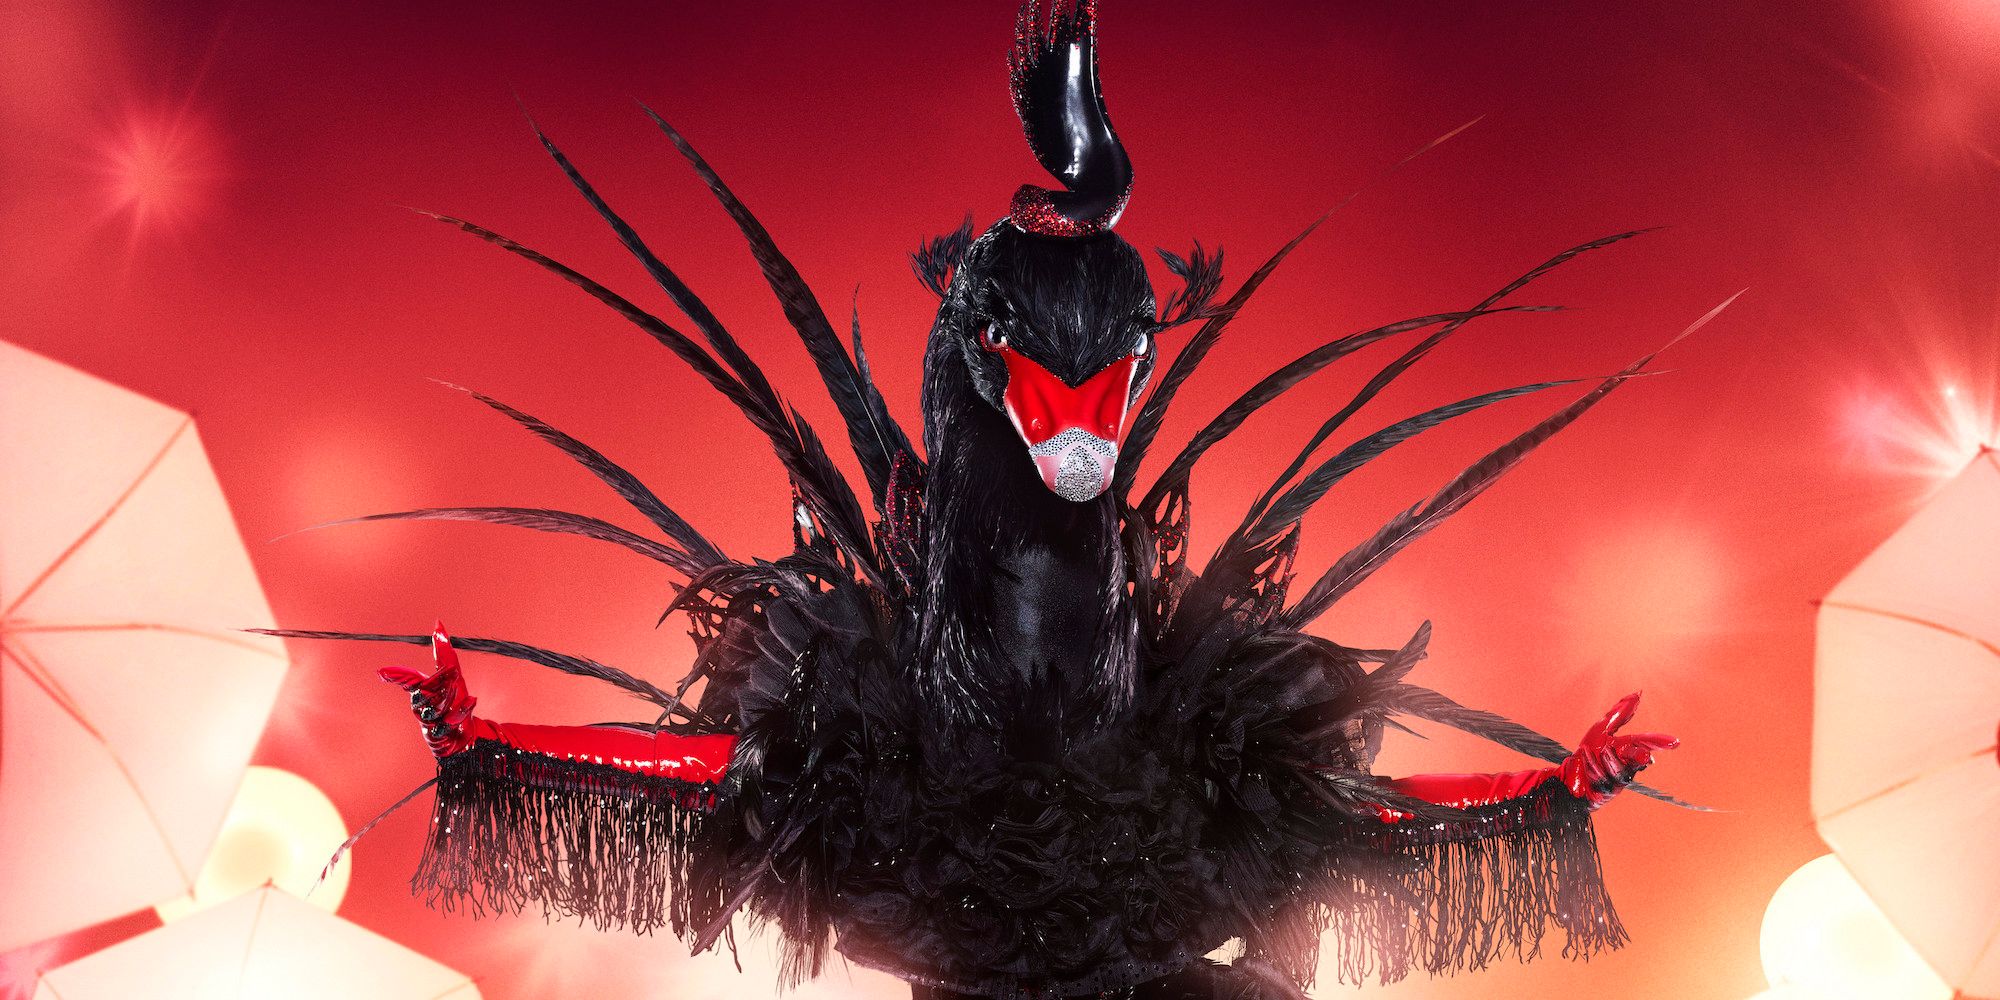 The Black Swan, JoJo, poses on stage in The Masked Singer